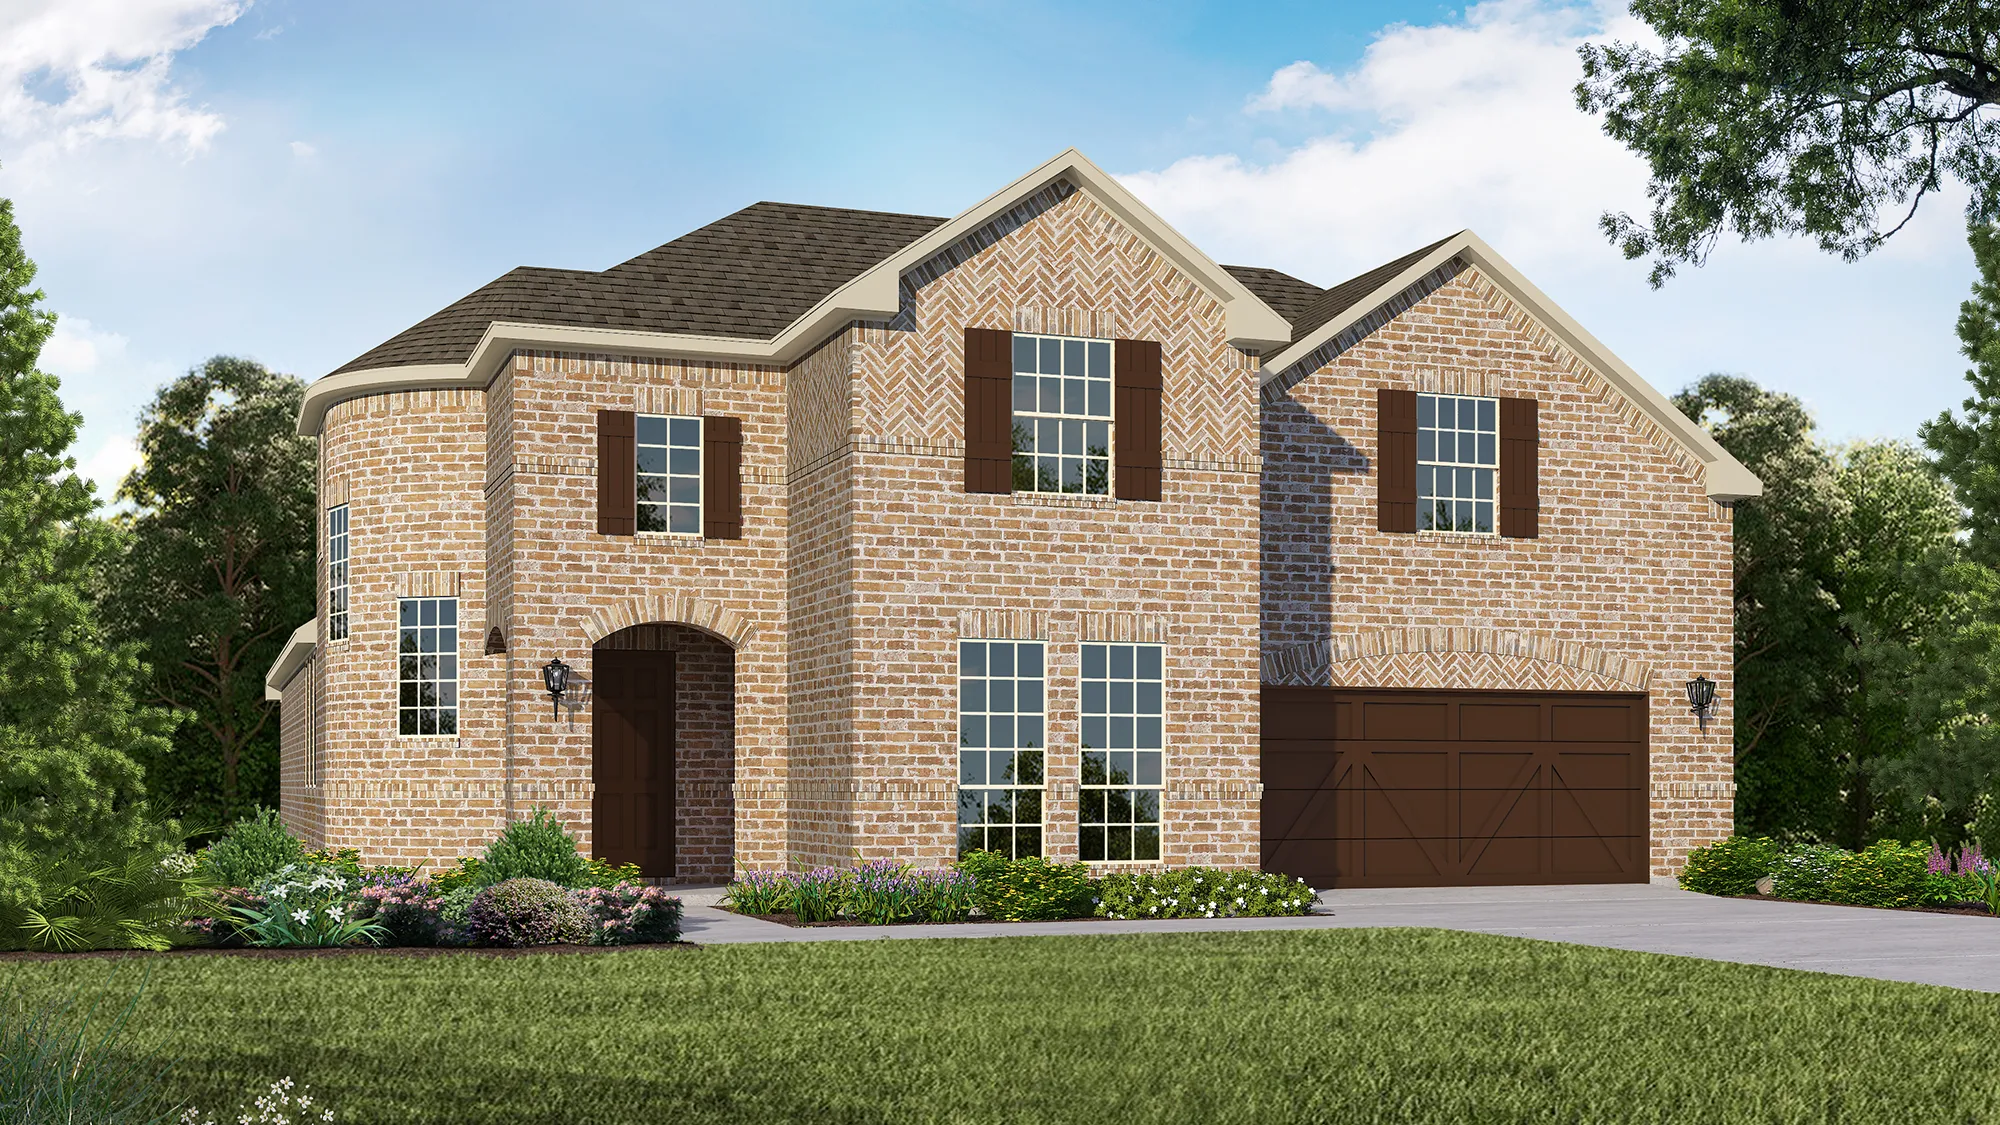 Plan 1687 Elevation A by American Legend Homes